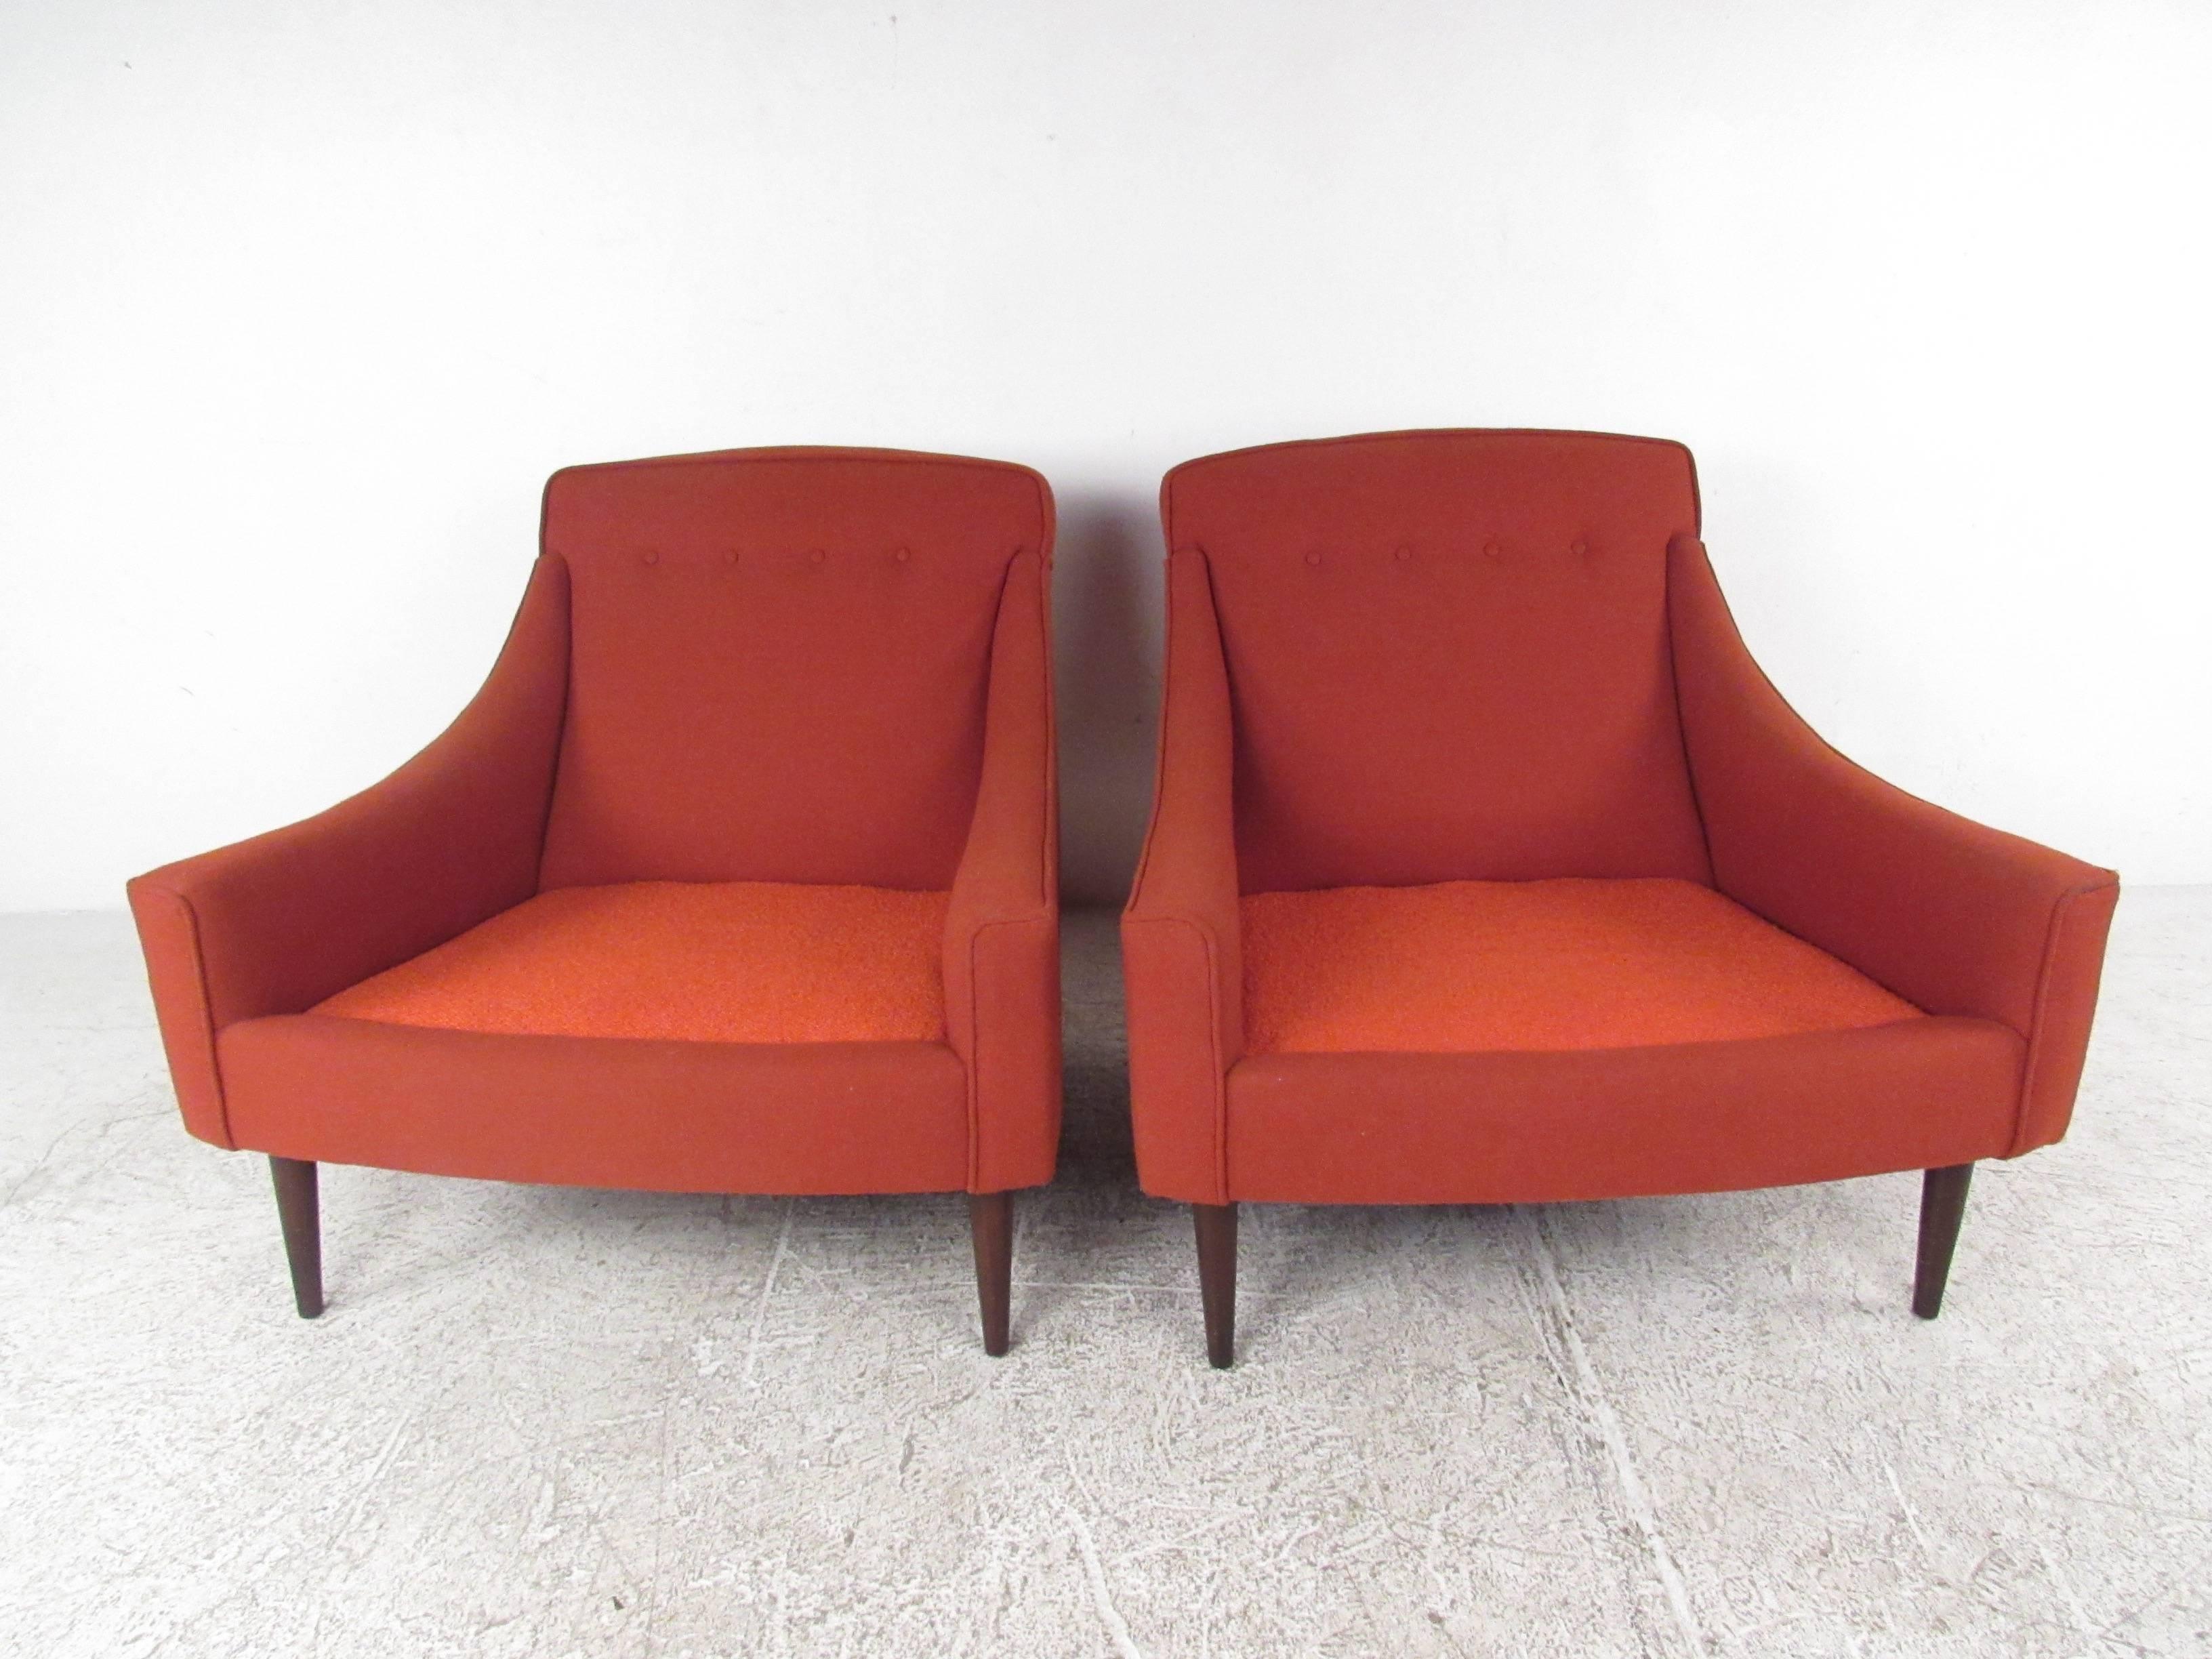 This stunning pair of Danish modern lounge chairs features wide and comfortable seat cushions with sculpted gradual armrests. Tufted upholstery and tapered legs add to the subtle style of this vintage set. Perfect additional seating for home or